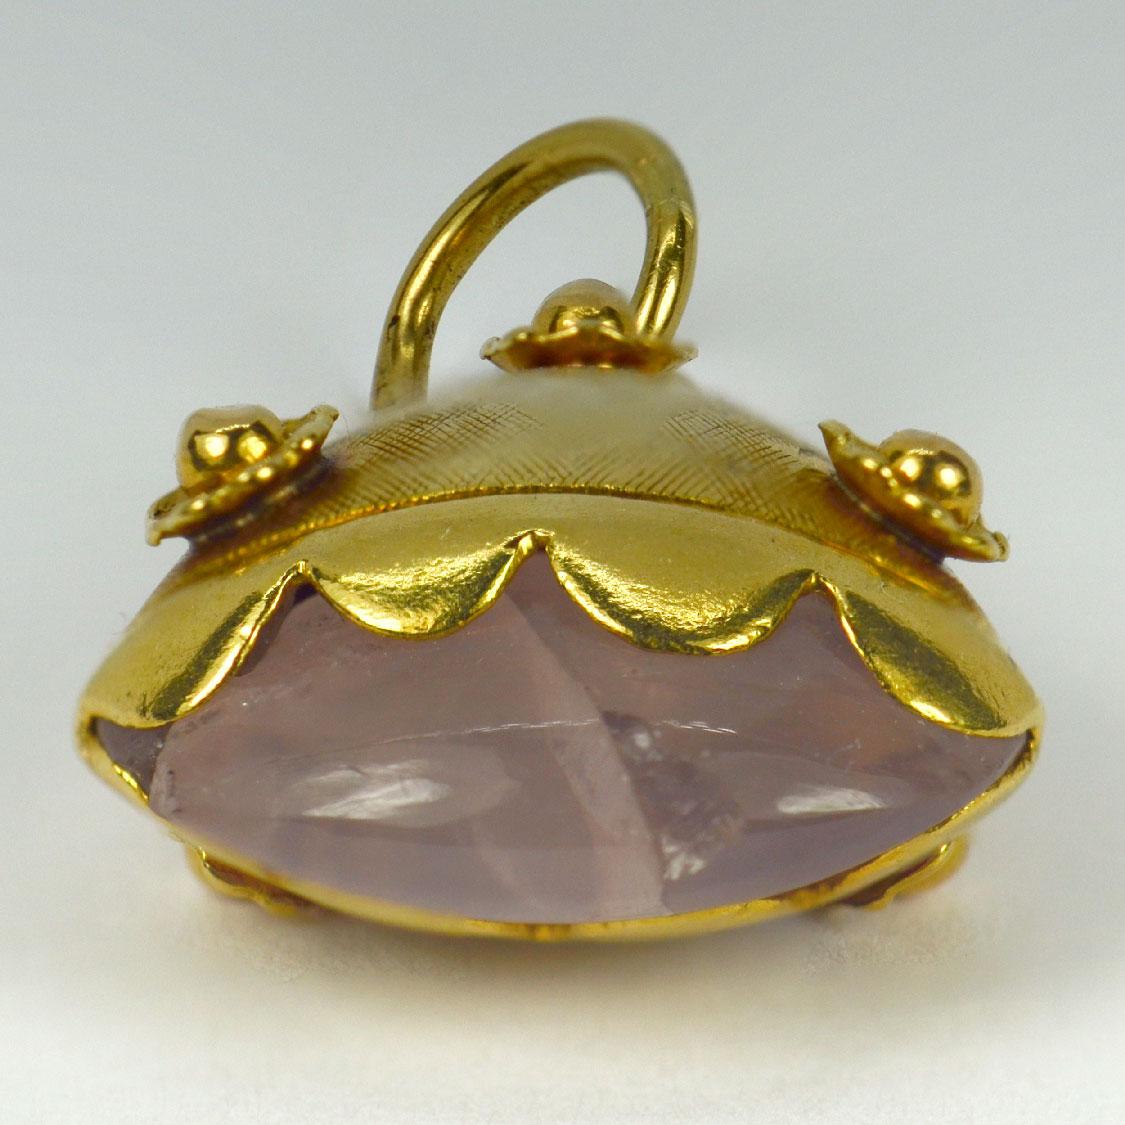 An 18 karat (18K) yellow gold charm pendant designed as a flaring oval cylinder with cross-hatch and rosette decoration, mounted to the base with an oval rose quartz cabochon (fractured). Stamped with the owl mark for French import and 18 karat